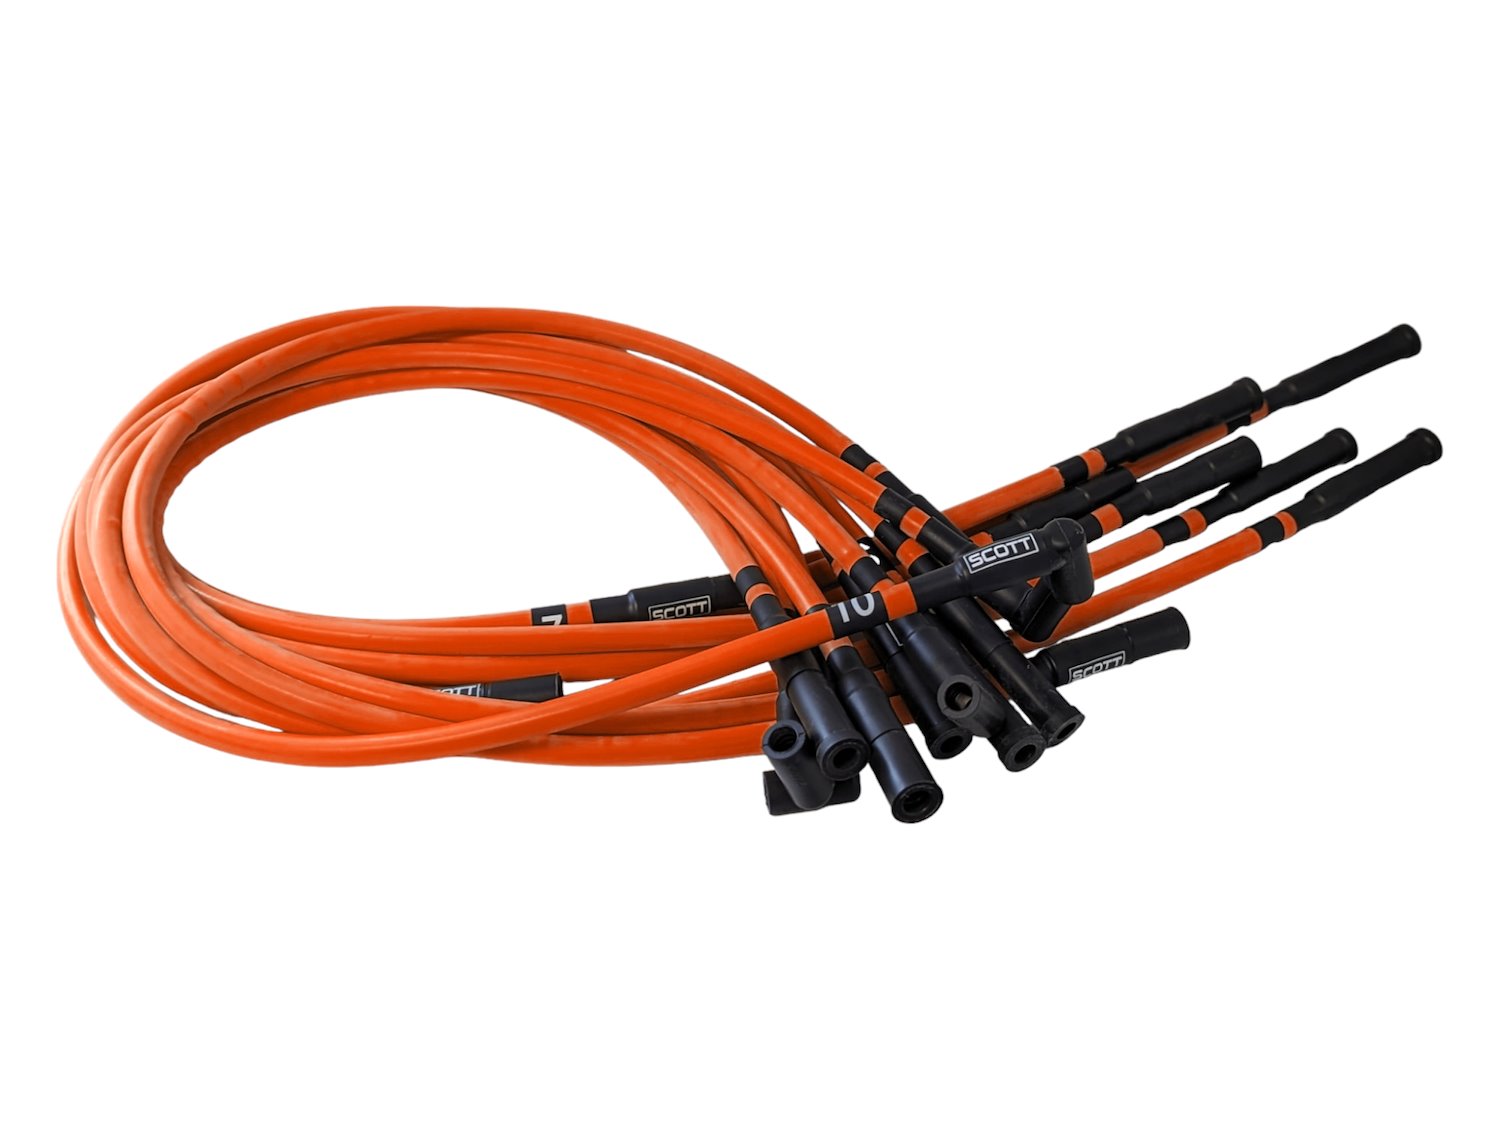 SPW-CH-690-II-9 High-Performance Silicone-Sleeved Spark Plug Wire Set for Dodge Viper (Gen-2) [Fluorescent Orange]